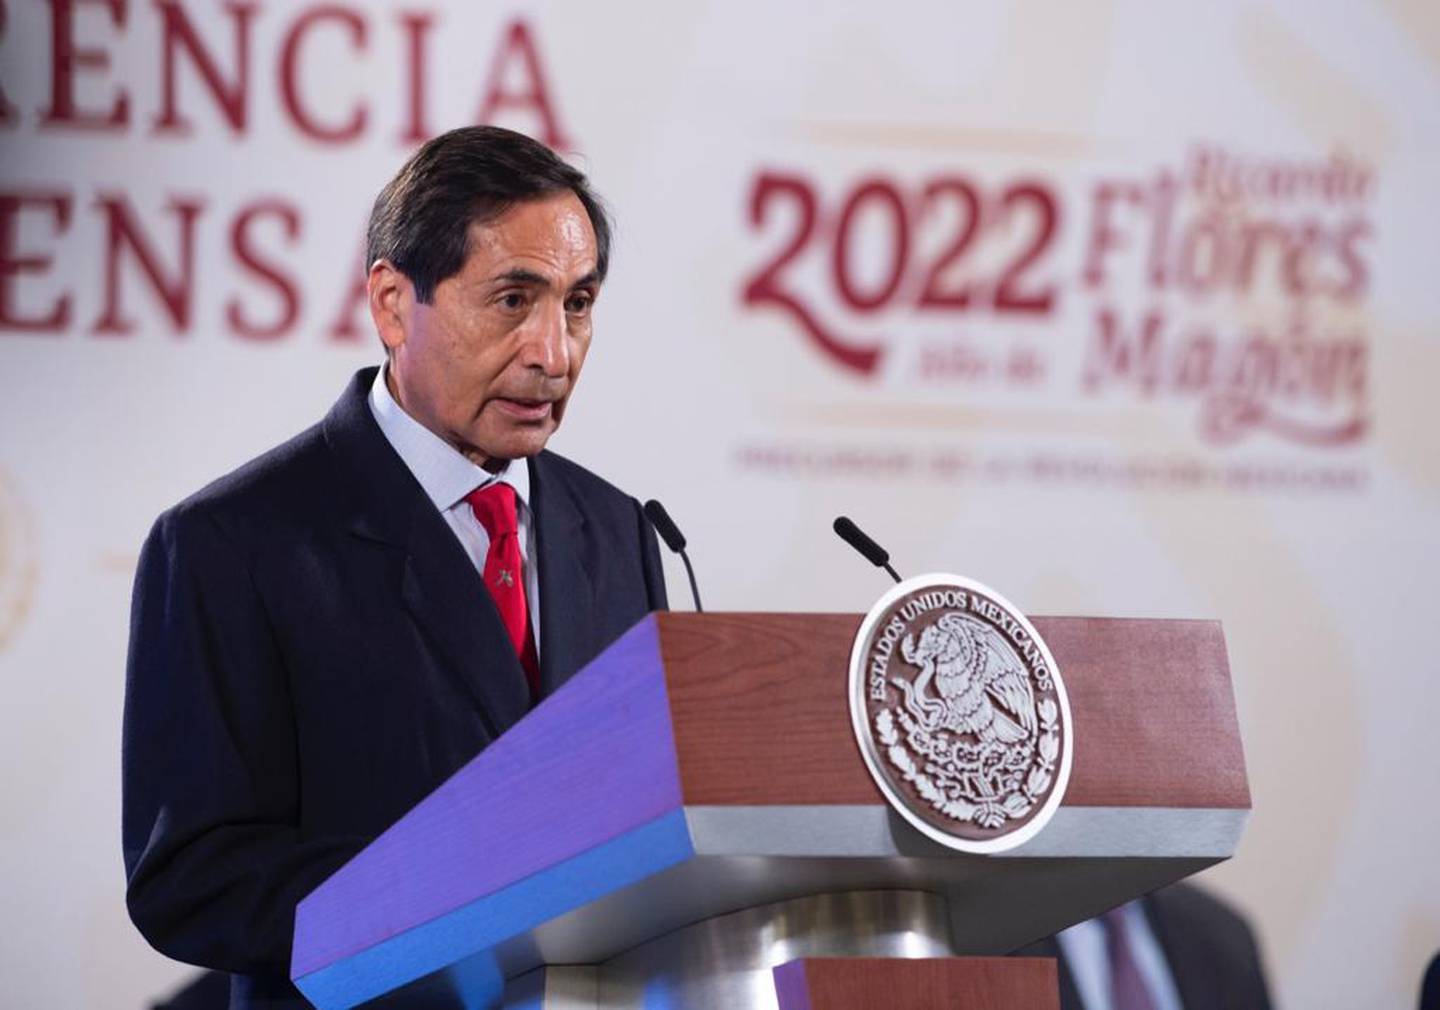 Mexico will pause exports of goods including white corn, beans and sardines, as well as scrap metal used for food cans, Rogelio Ramirez de la O said.